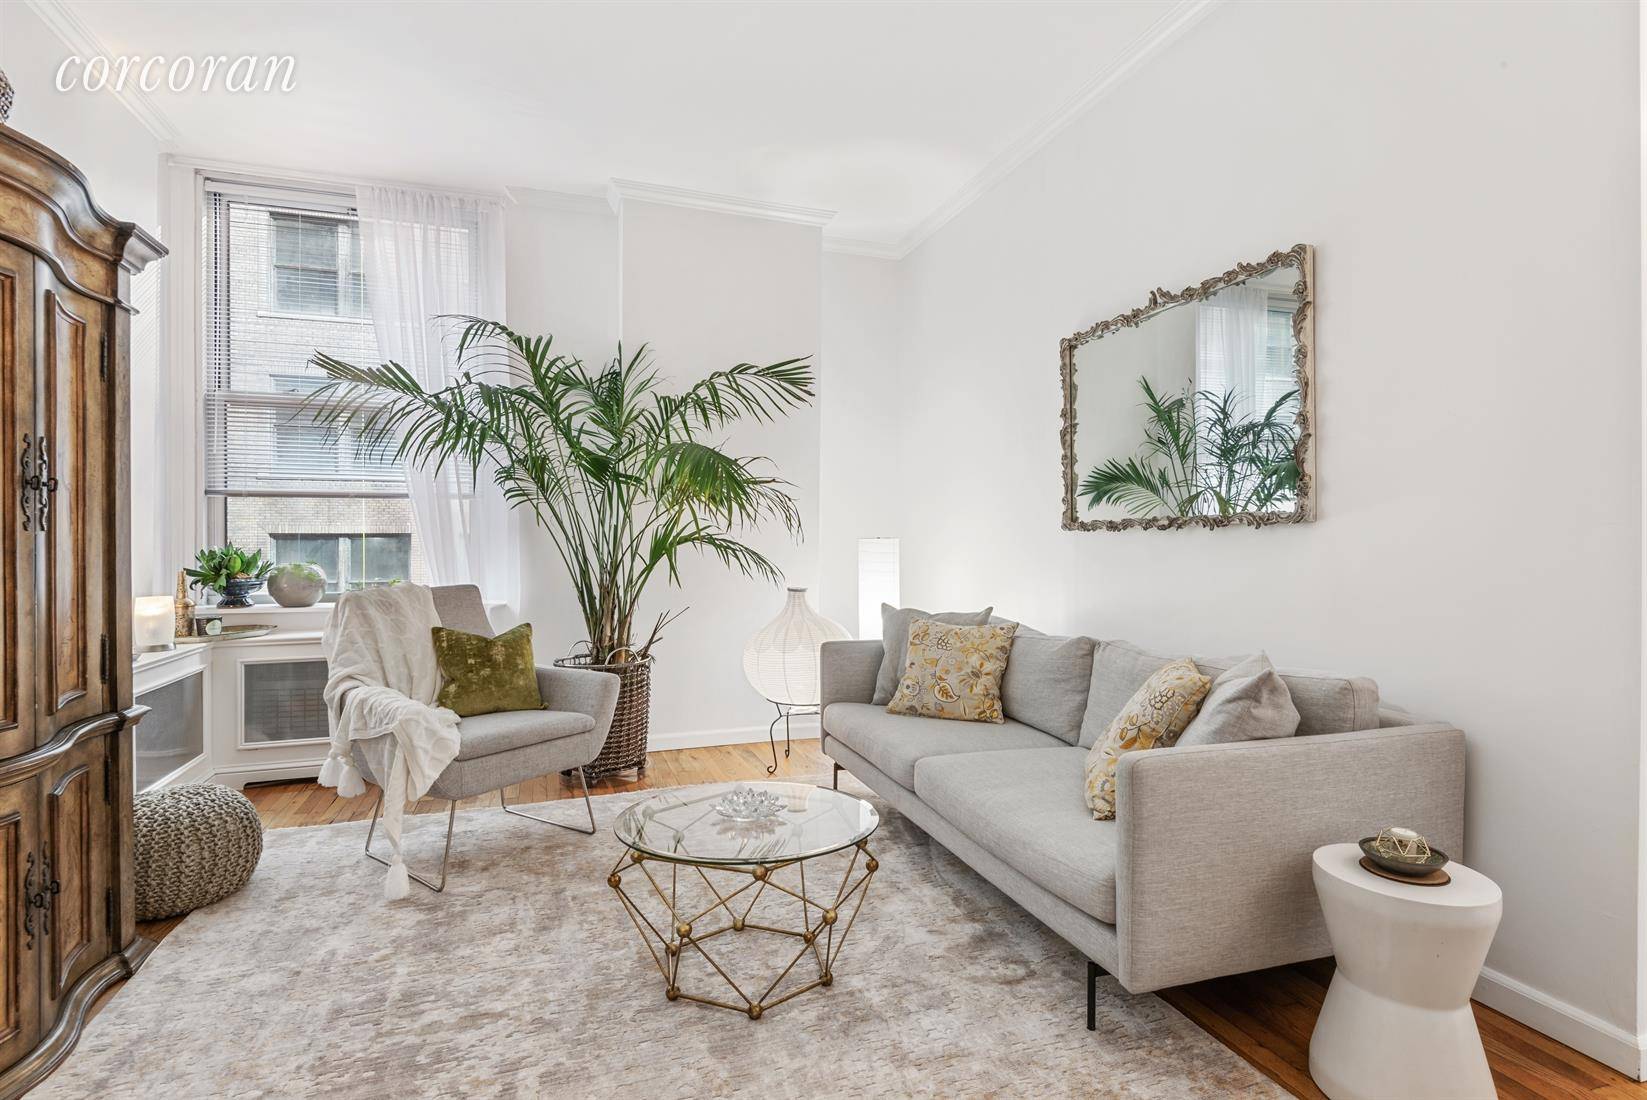 NOW AVAILABLE ! 159 Madison Avenue, 7G is an outstanding corner 1 bedroom home located in one of NoMad's sought after prewar full service coops.